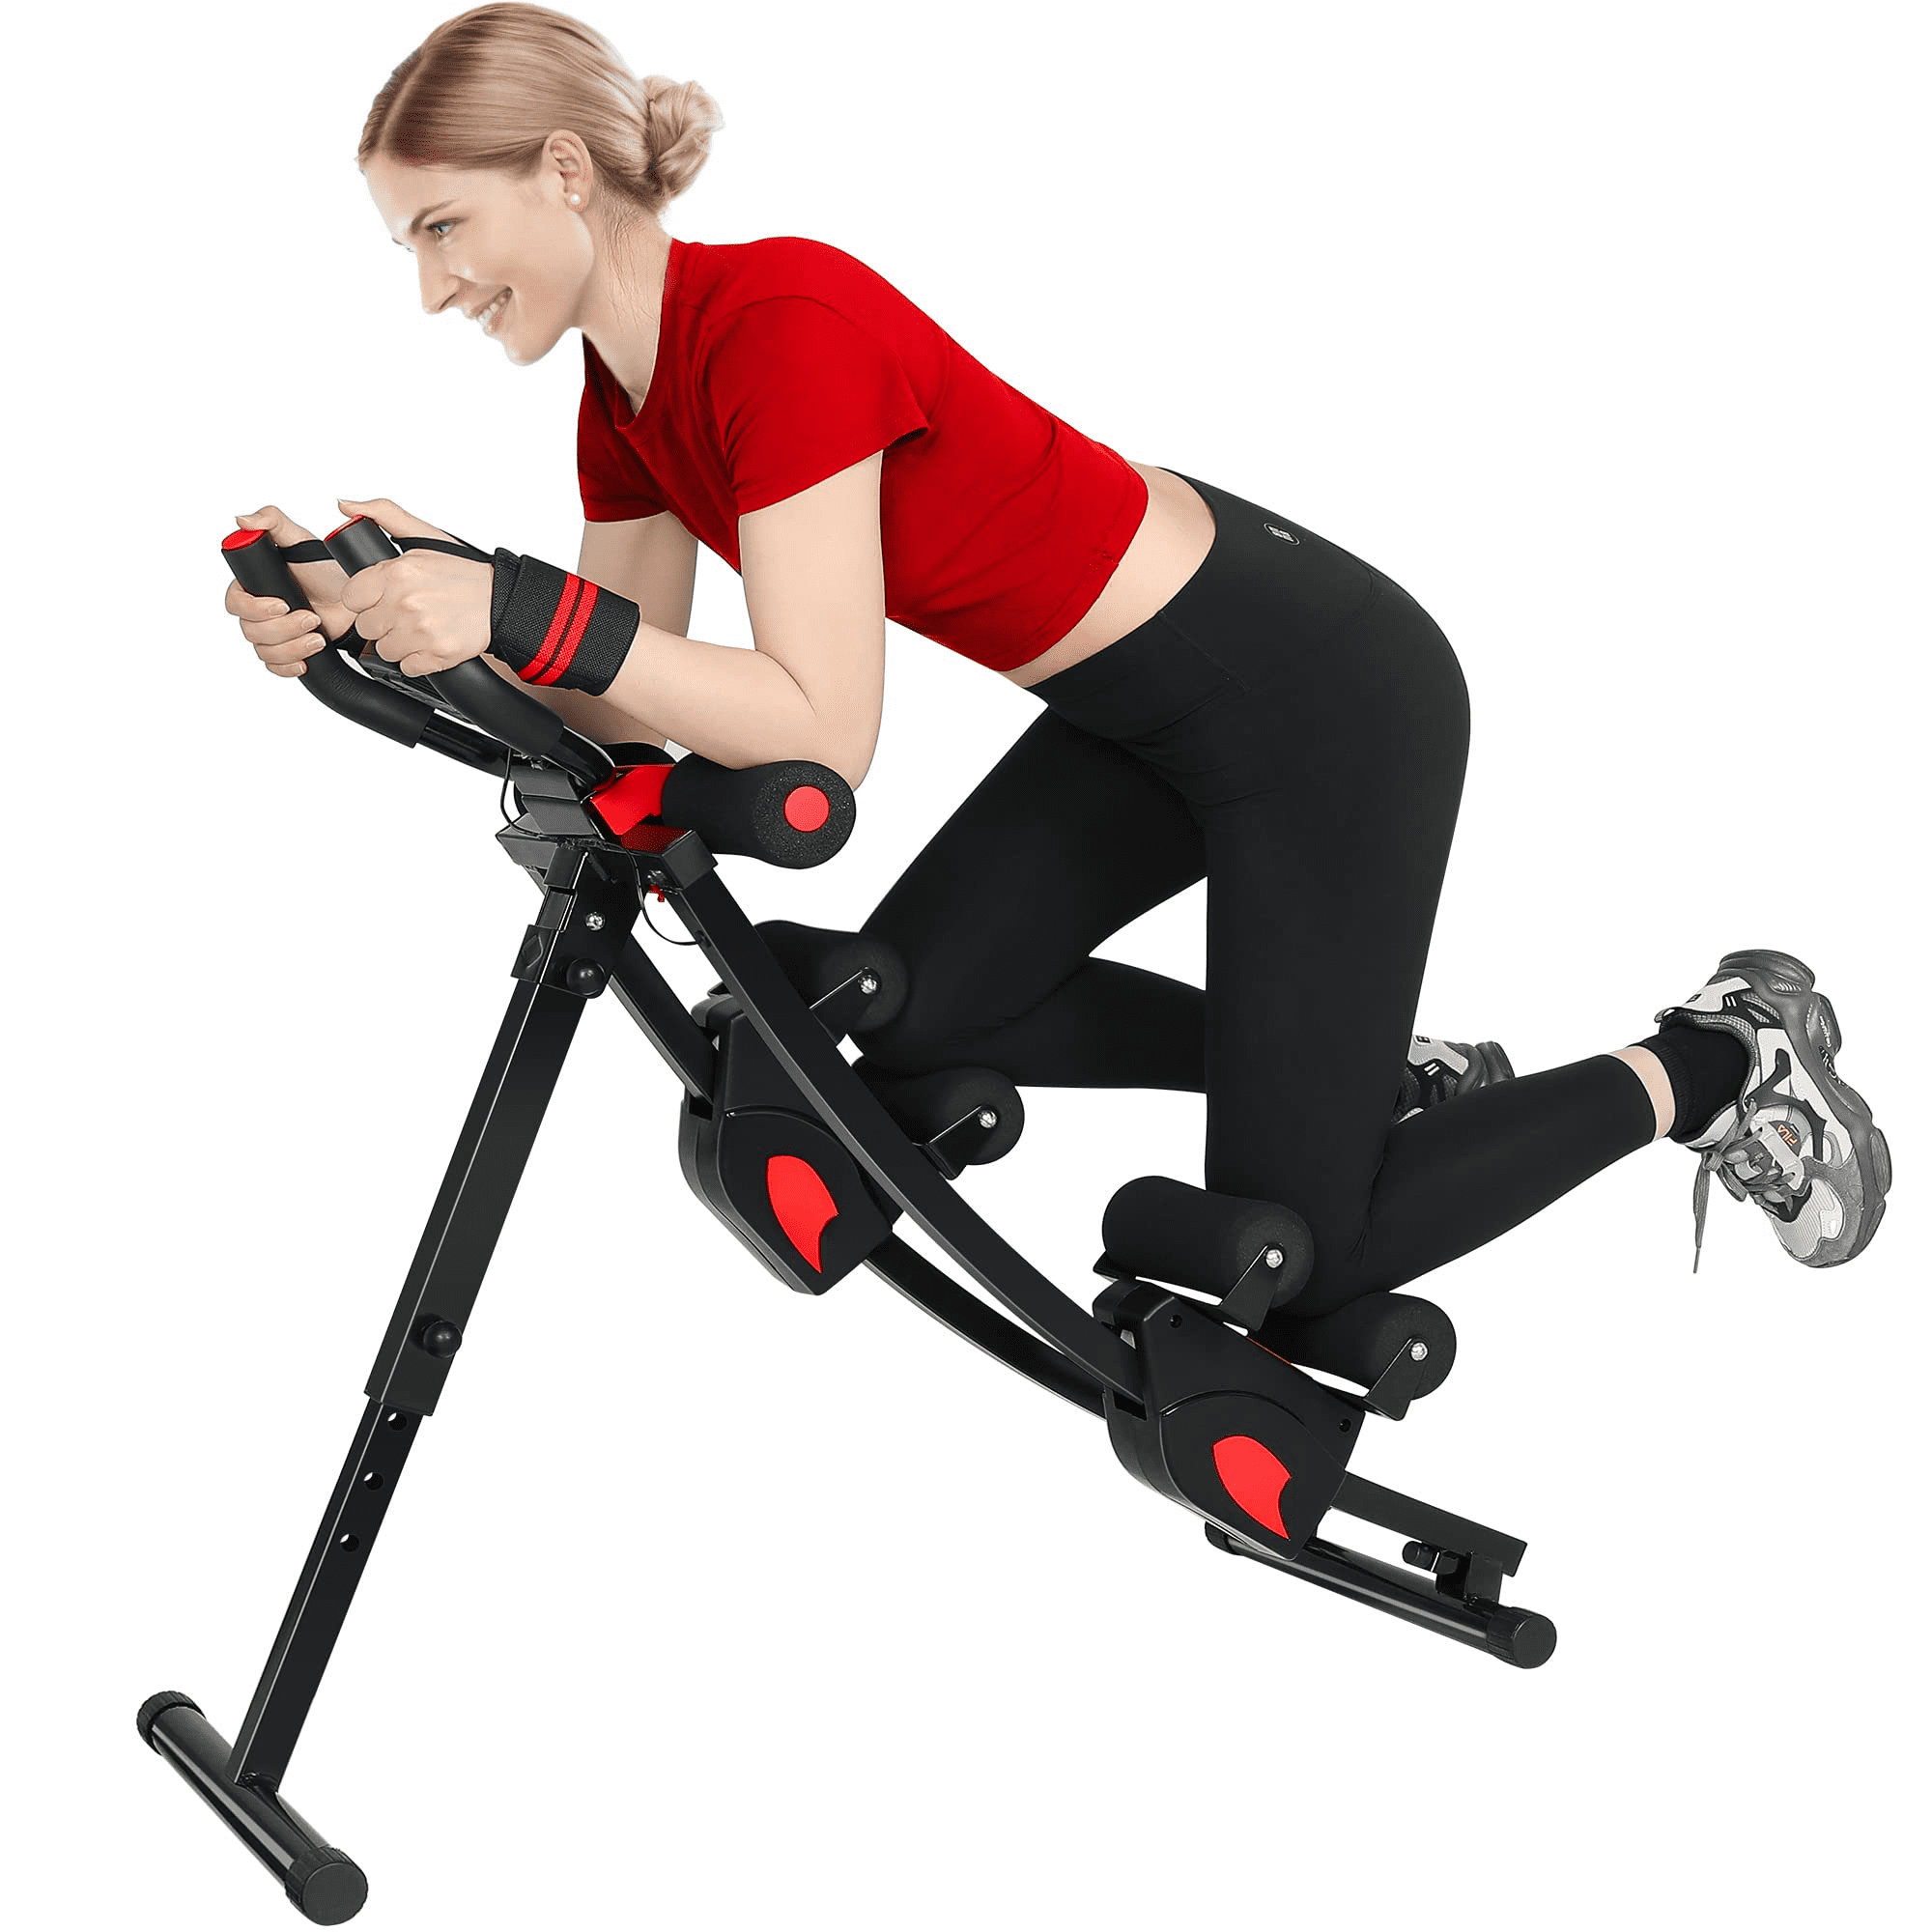 Details about   Home Abdominal Trainer Crunch Machine&Sit Up Bench Core Fitness Gym Exercise USA 